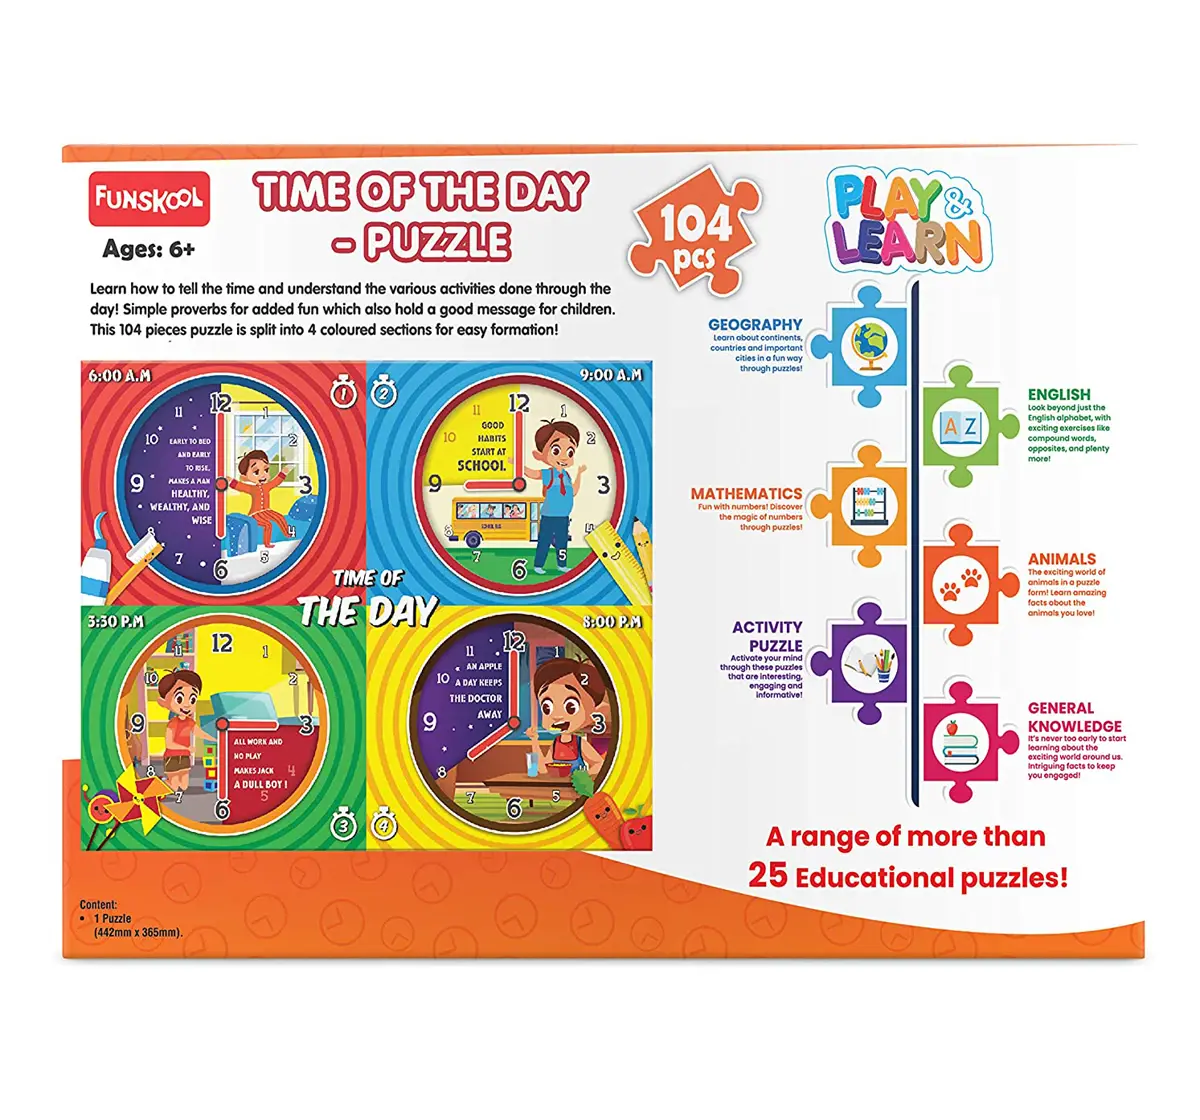 Play&Learn Everyday Time 104 pieces Puzzle Cardboard Multicolour 3Y+